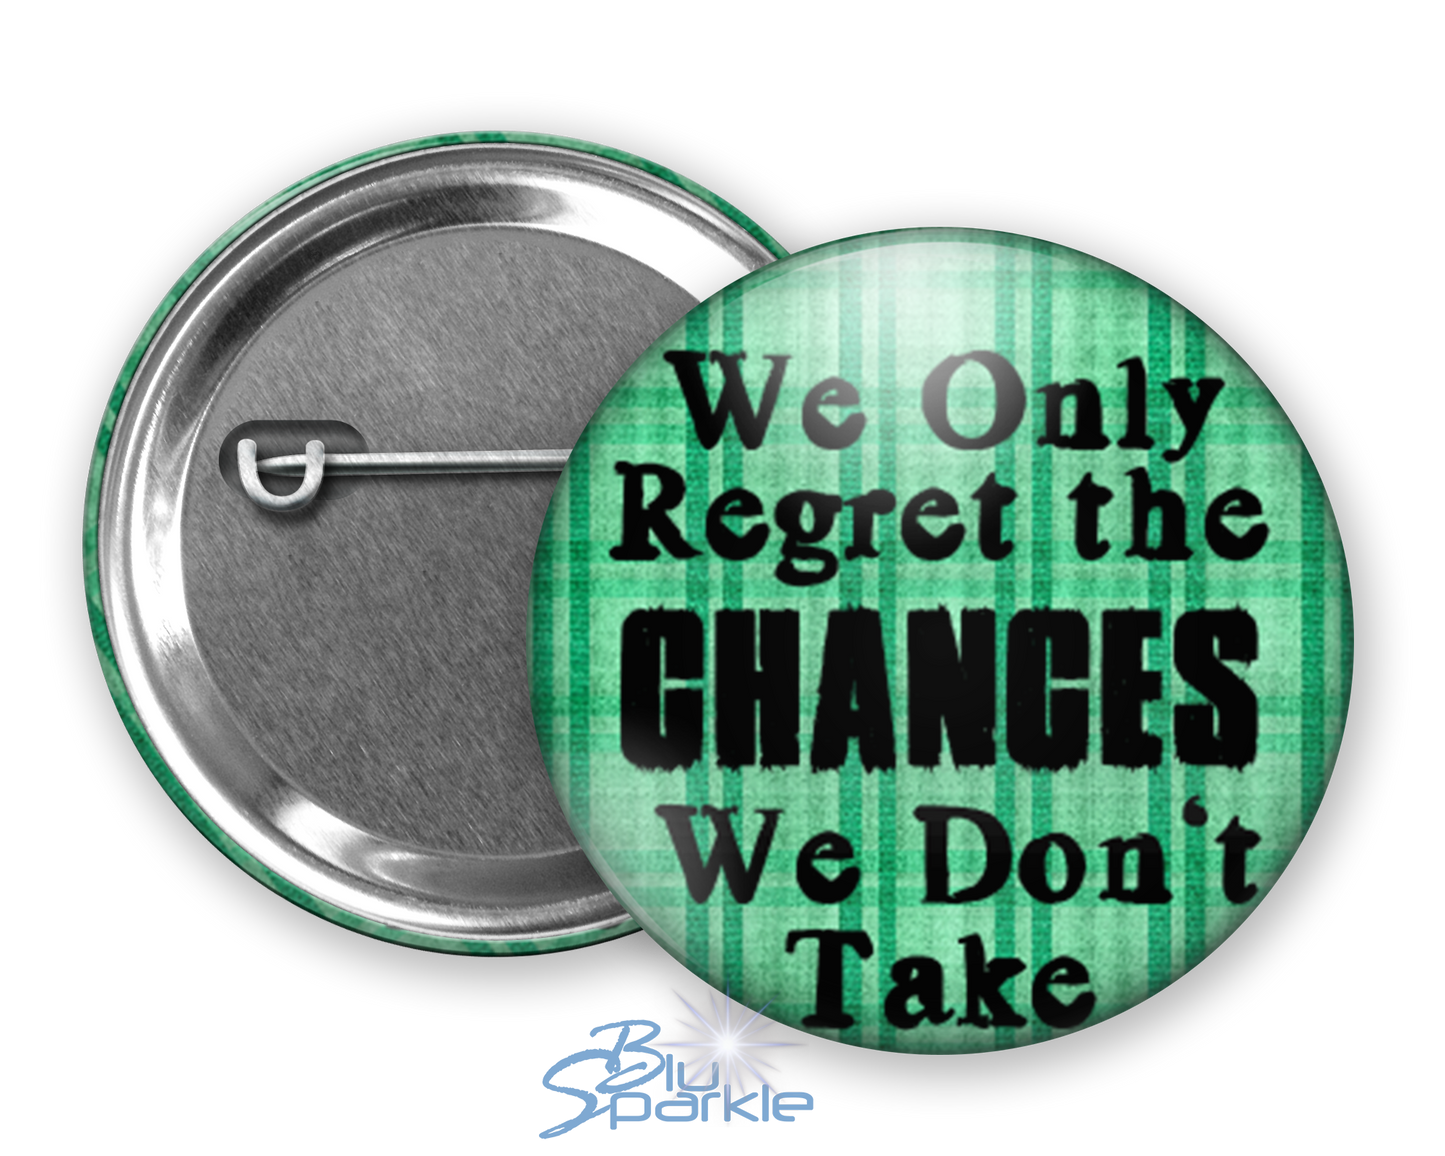 In The End We Only Regret The Chances We Don't Take - Pinback Buttons